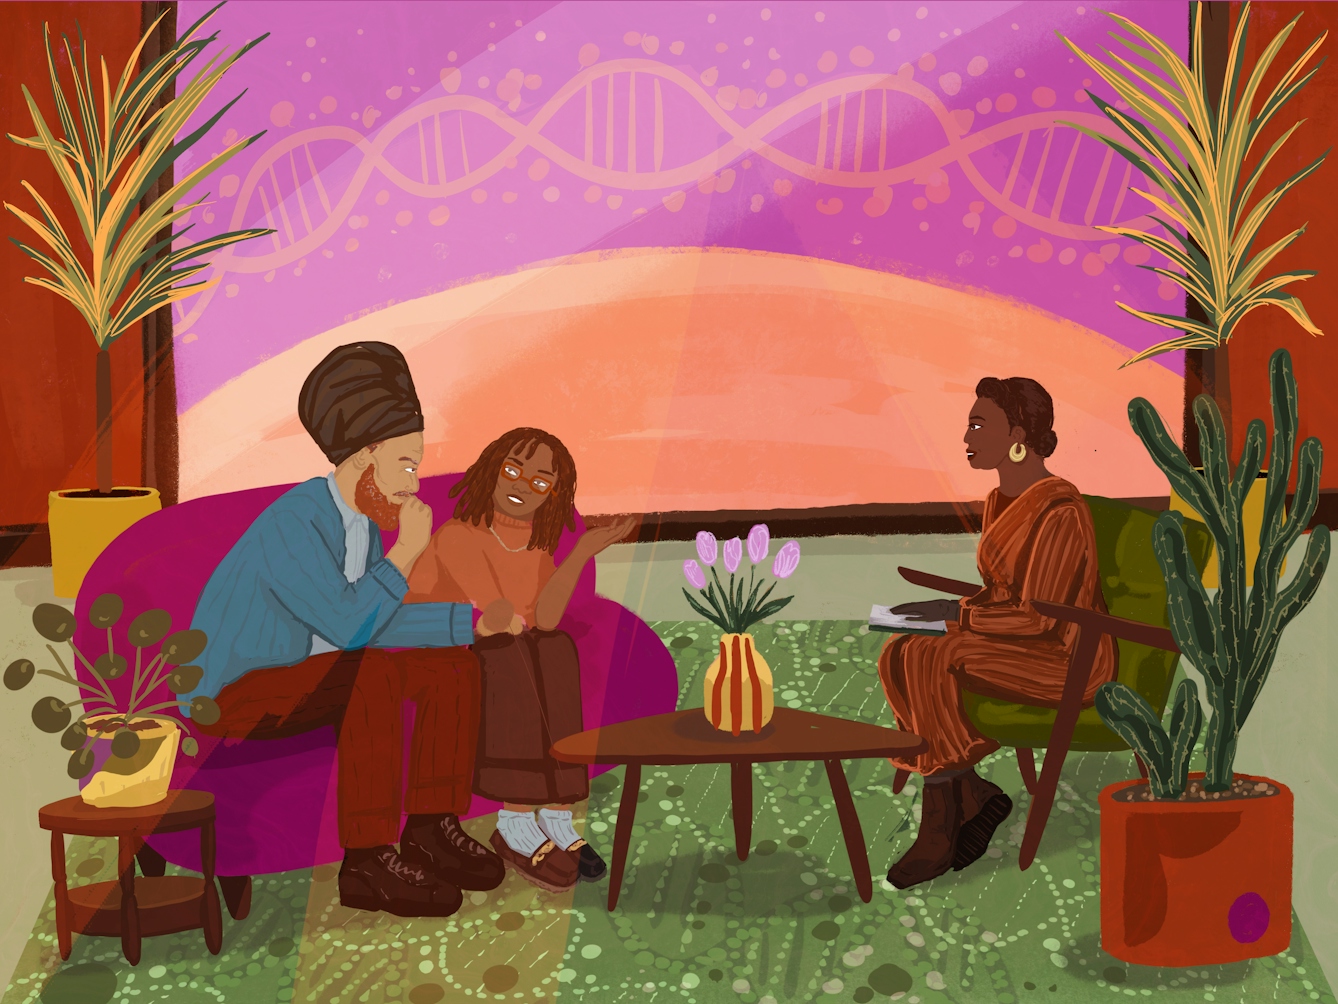 An illustration of a therapy session in progress. A Therapist sit’s in a chair across from a couple having a discussion. In the room are large plants and in the background a strand of DNA is depicted. 